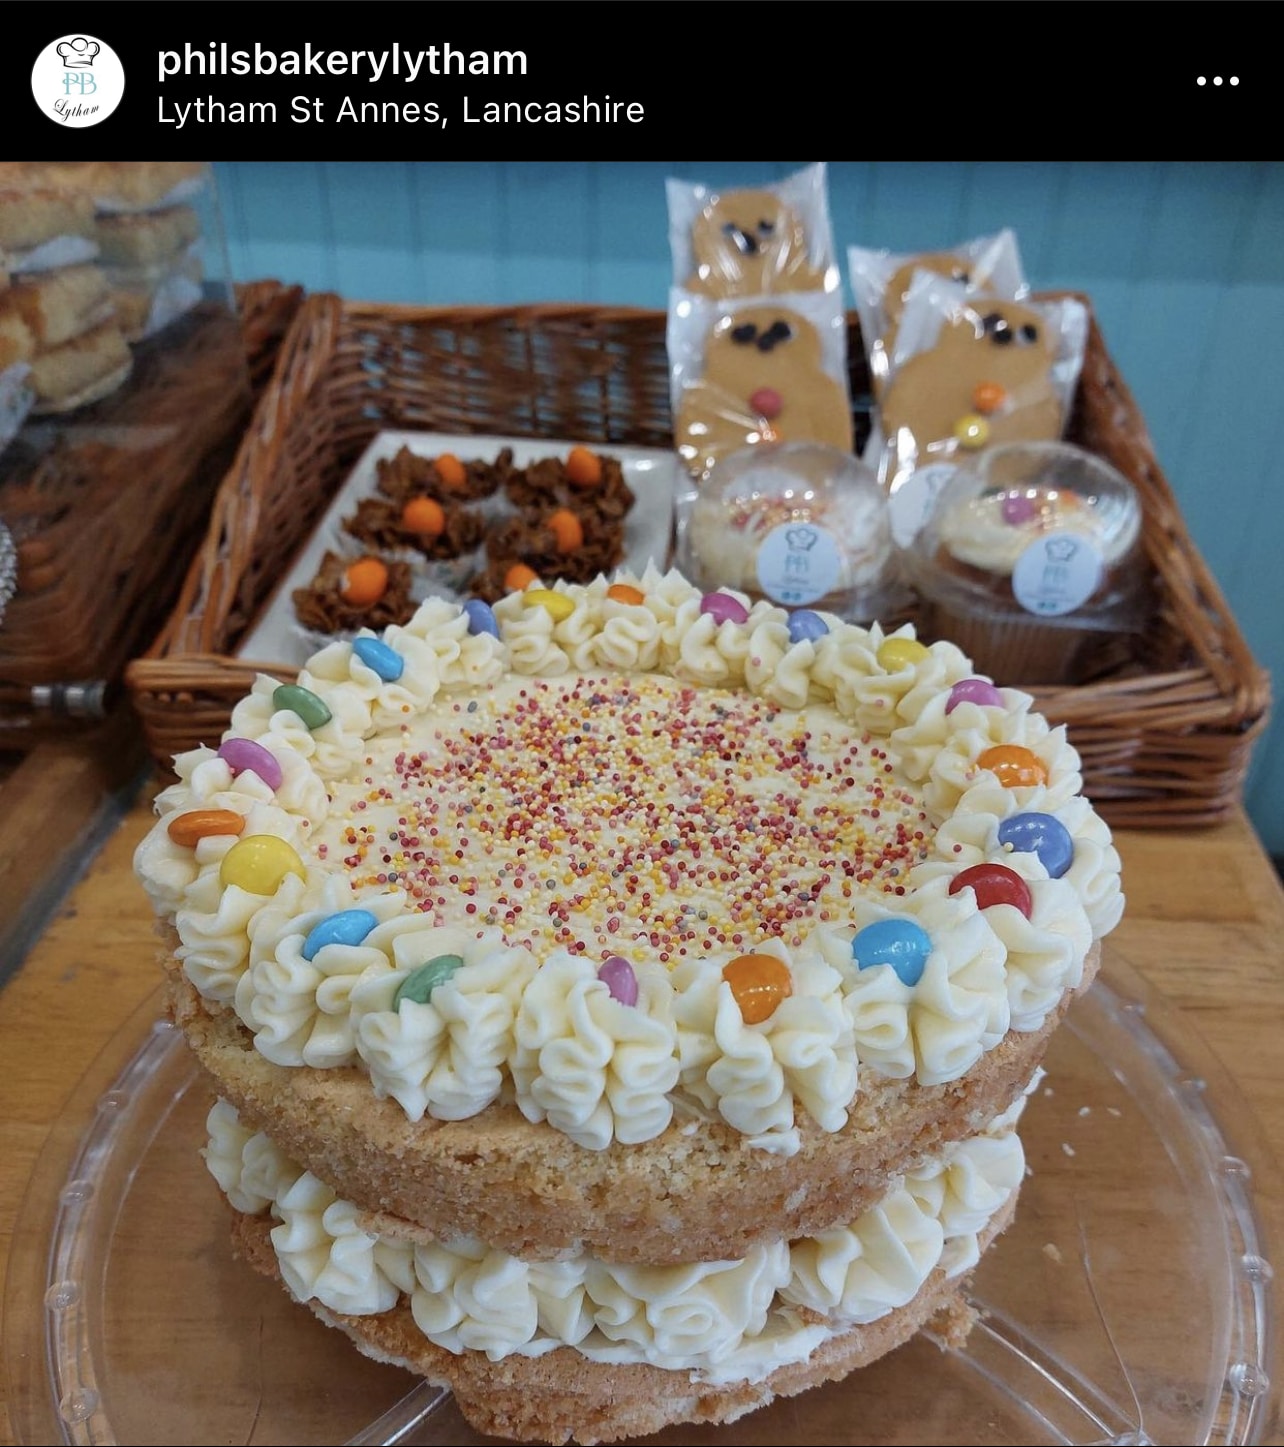 Phils Bakery | Great bread & cakes, Lytham